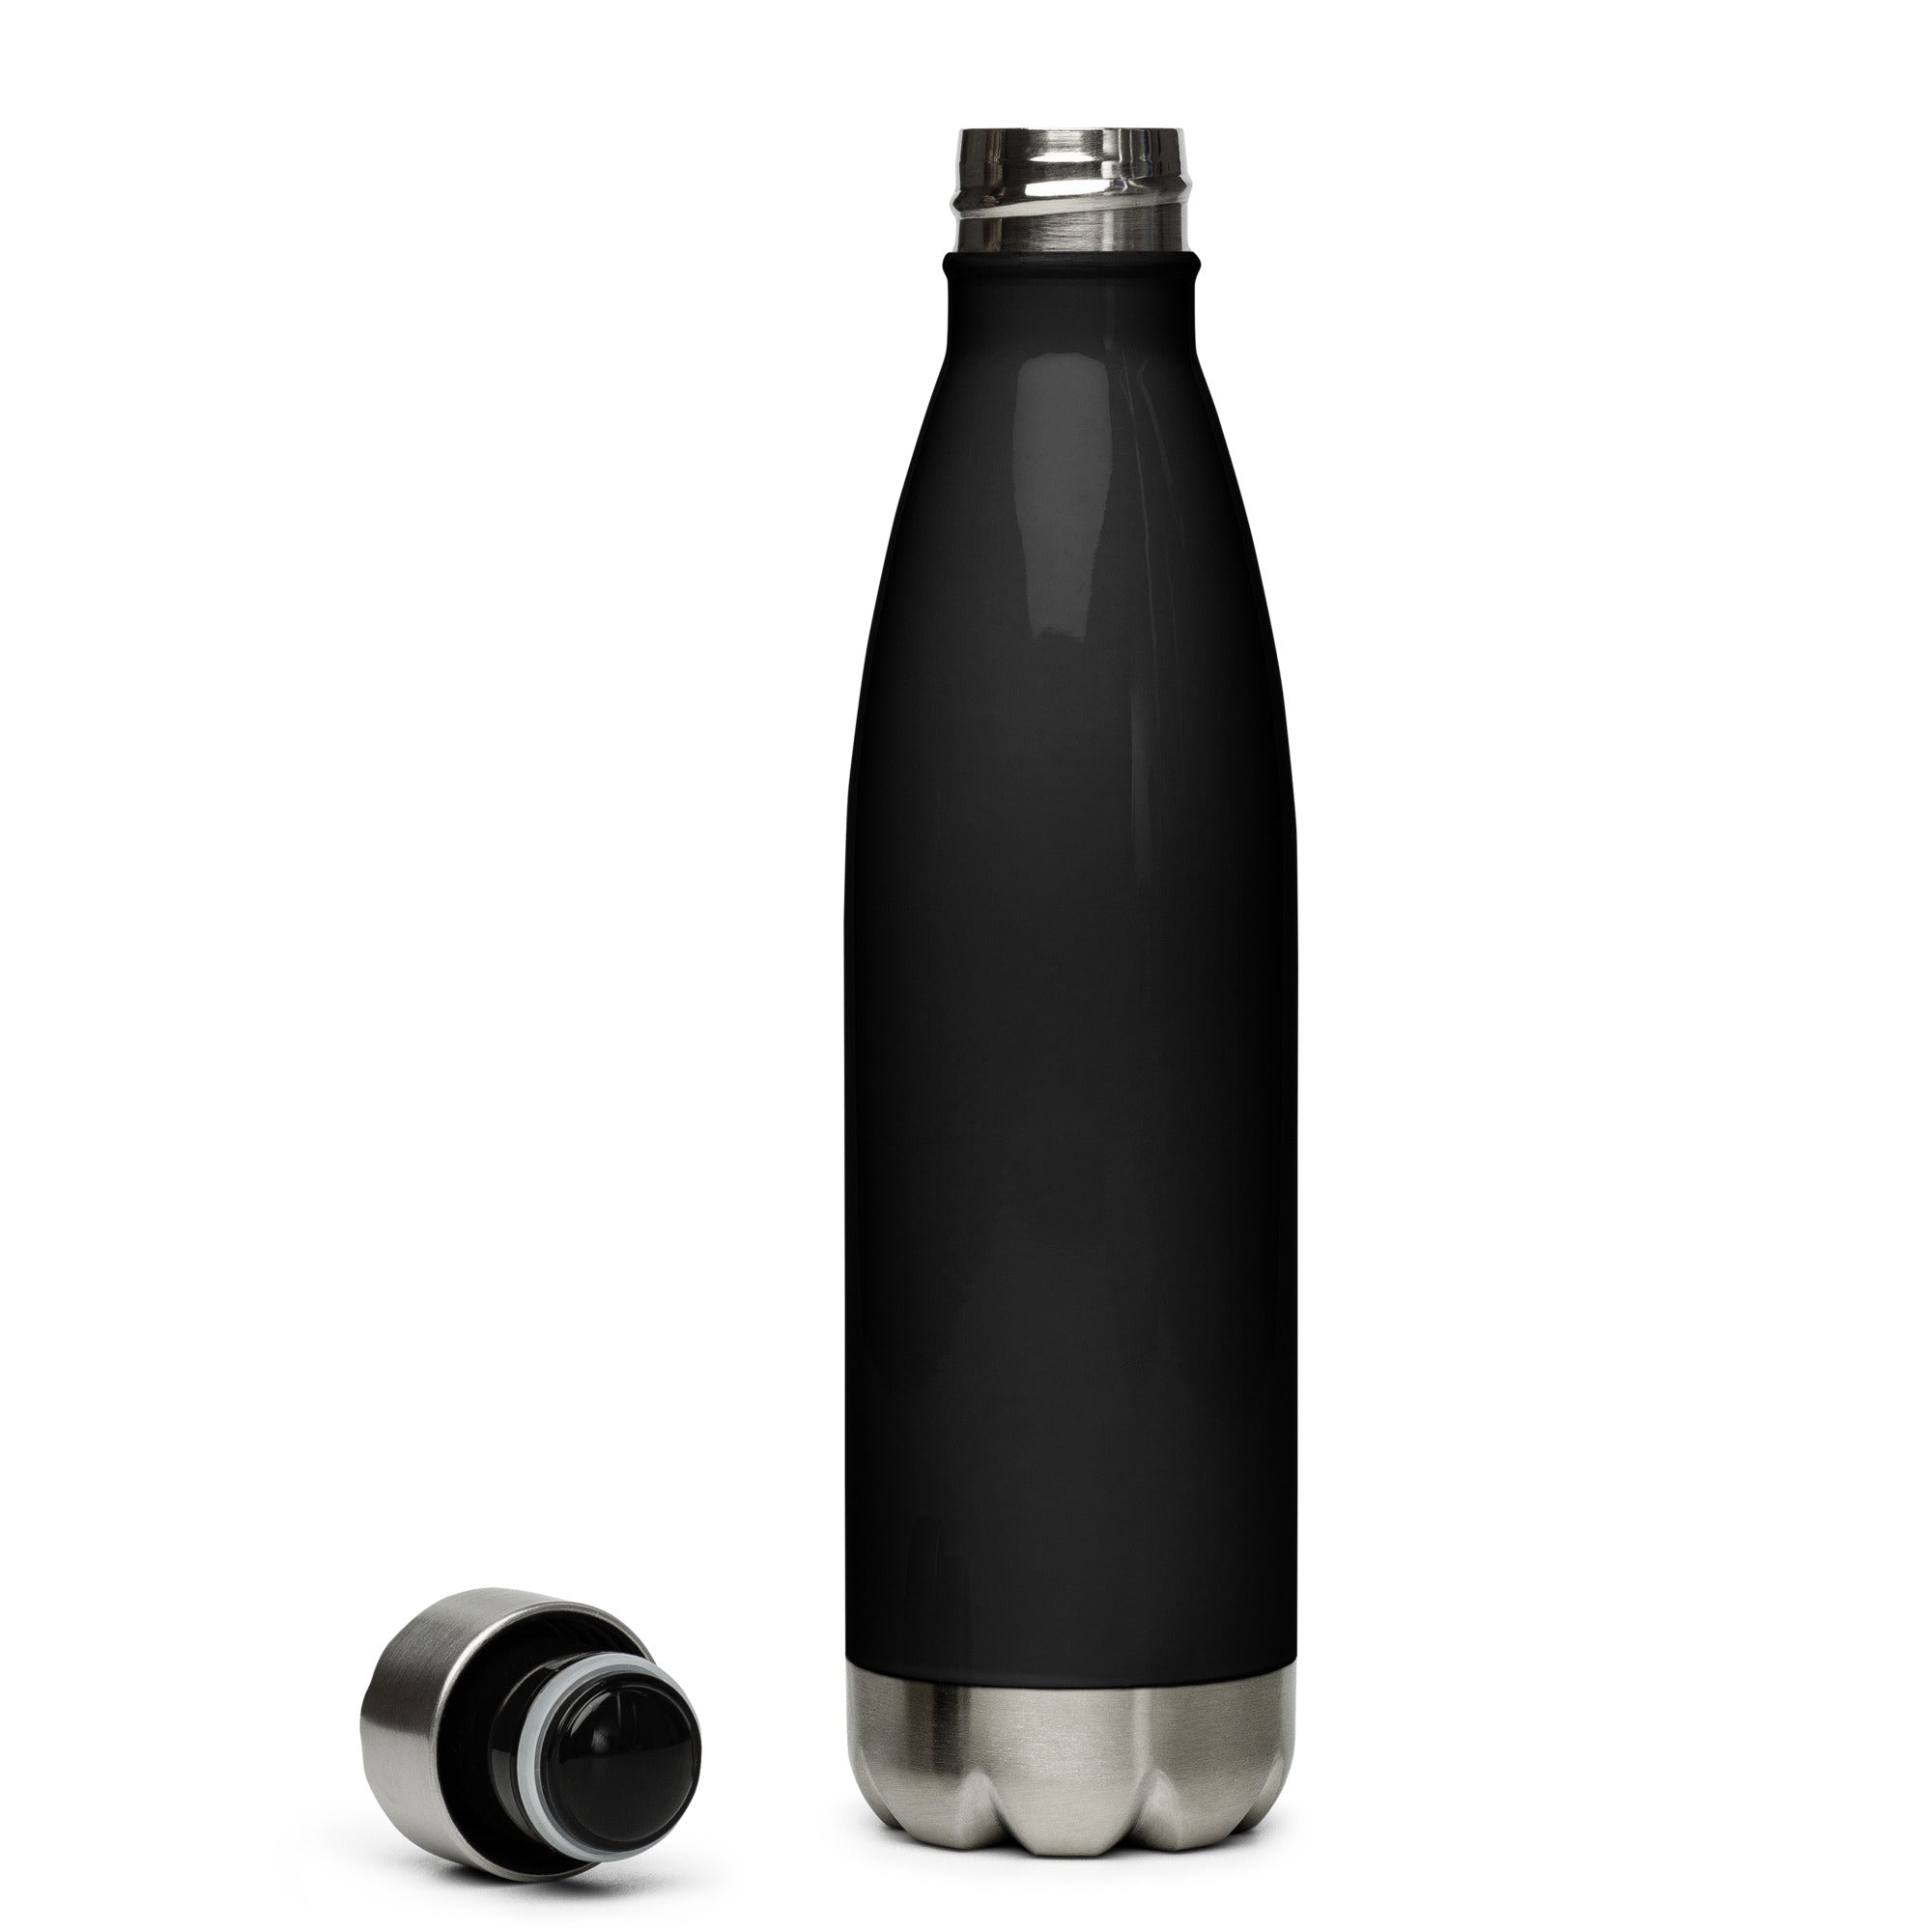 "VA is for Growers" Stainless Steel Water Bottle